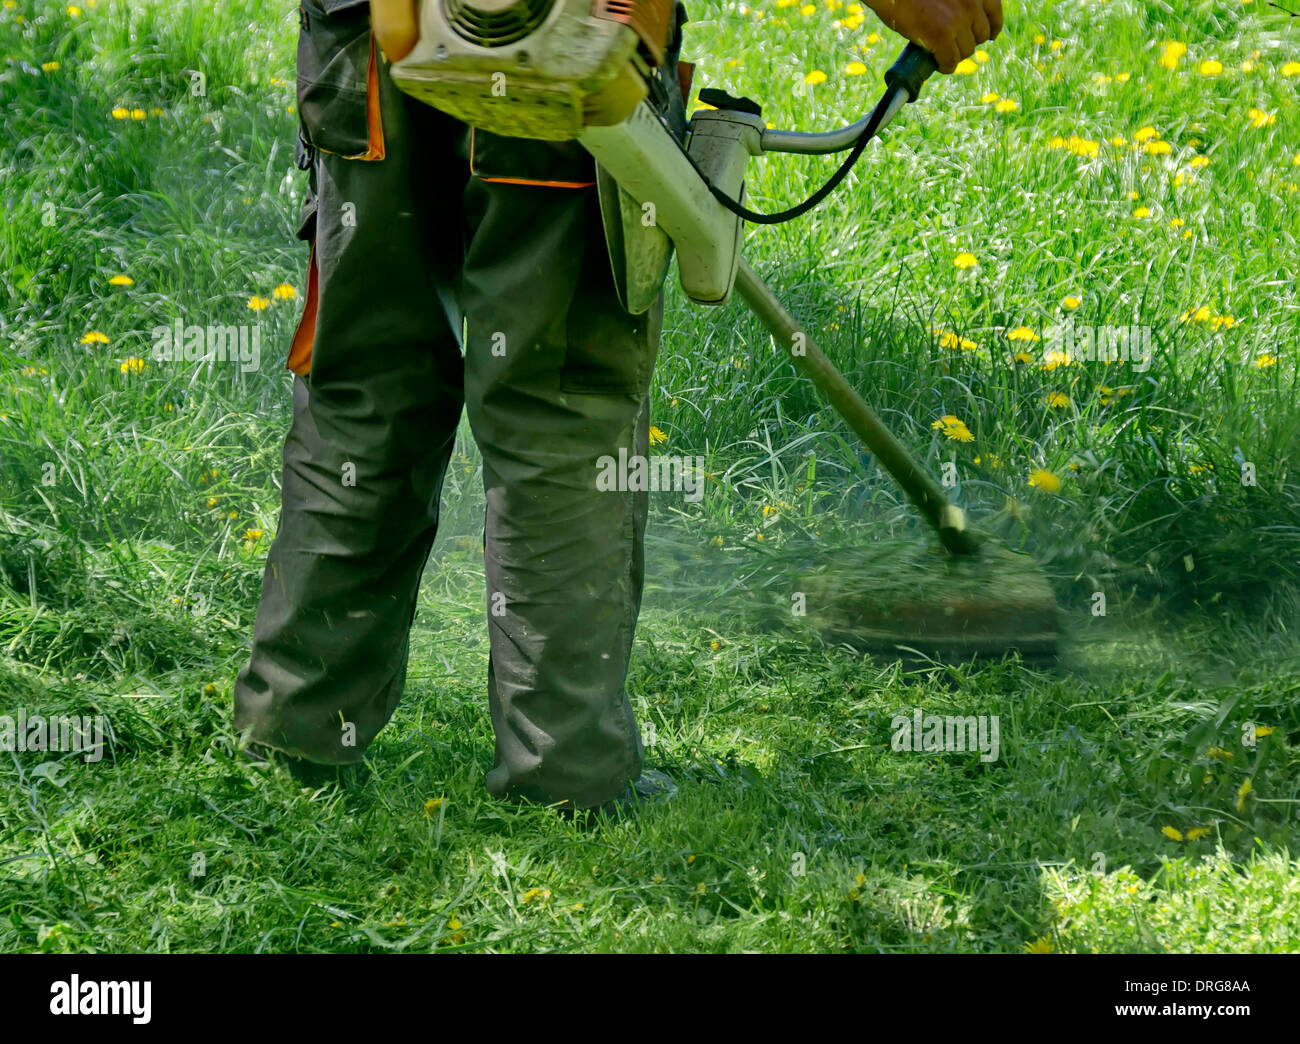 Experienced worker cut grass with Lawn mower in garden Stock Photo